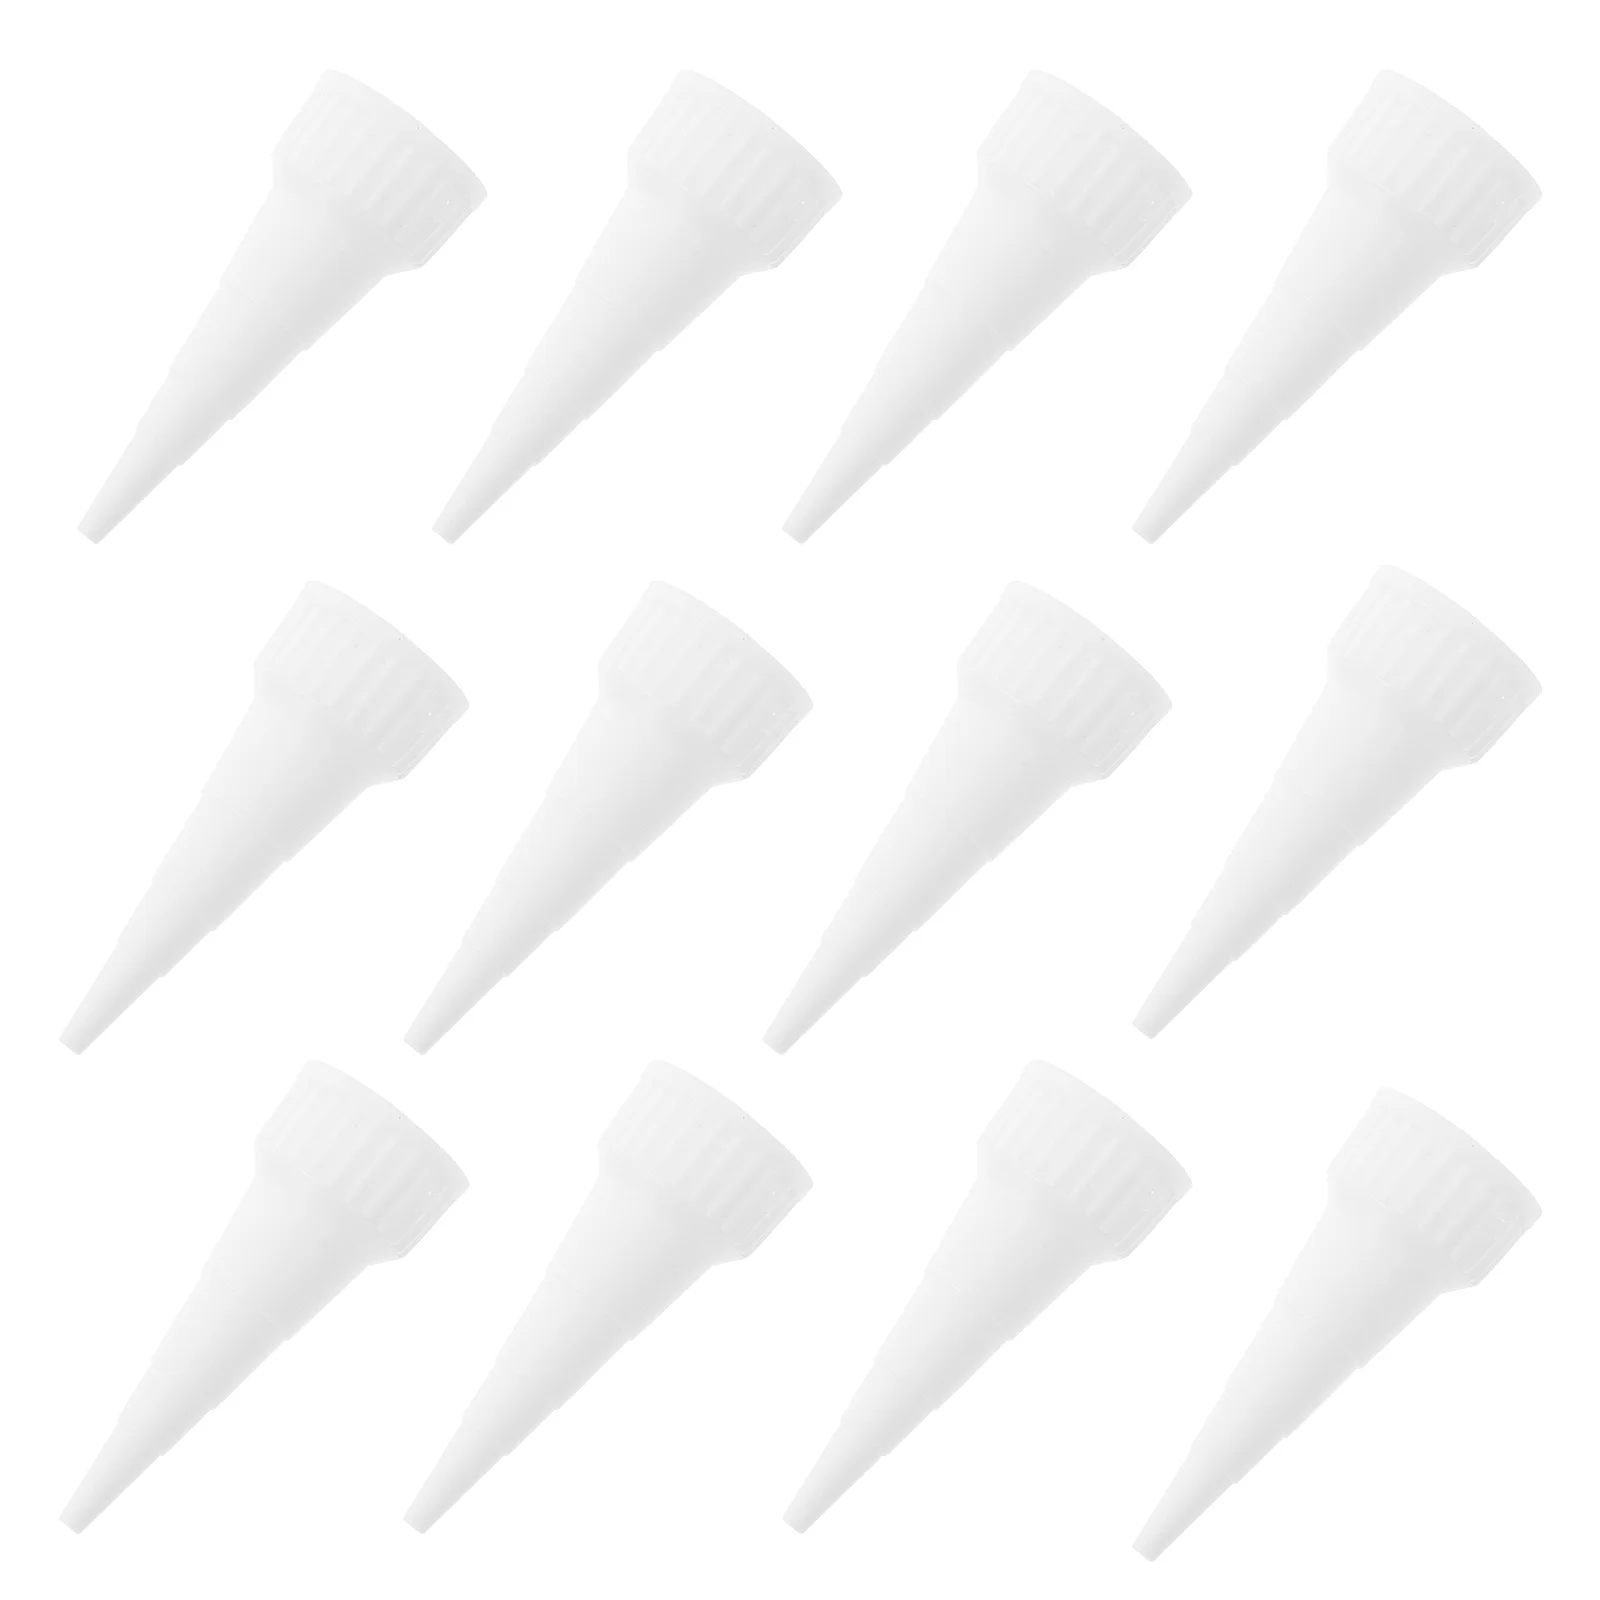 

20 Pcs Replacement Craft Glue Applicator Tip for Craft Glue Replacement Nozzles